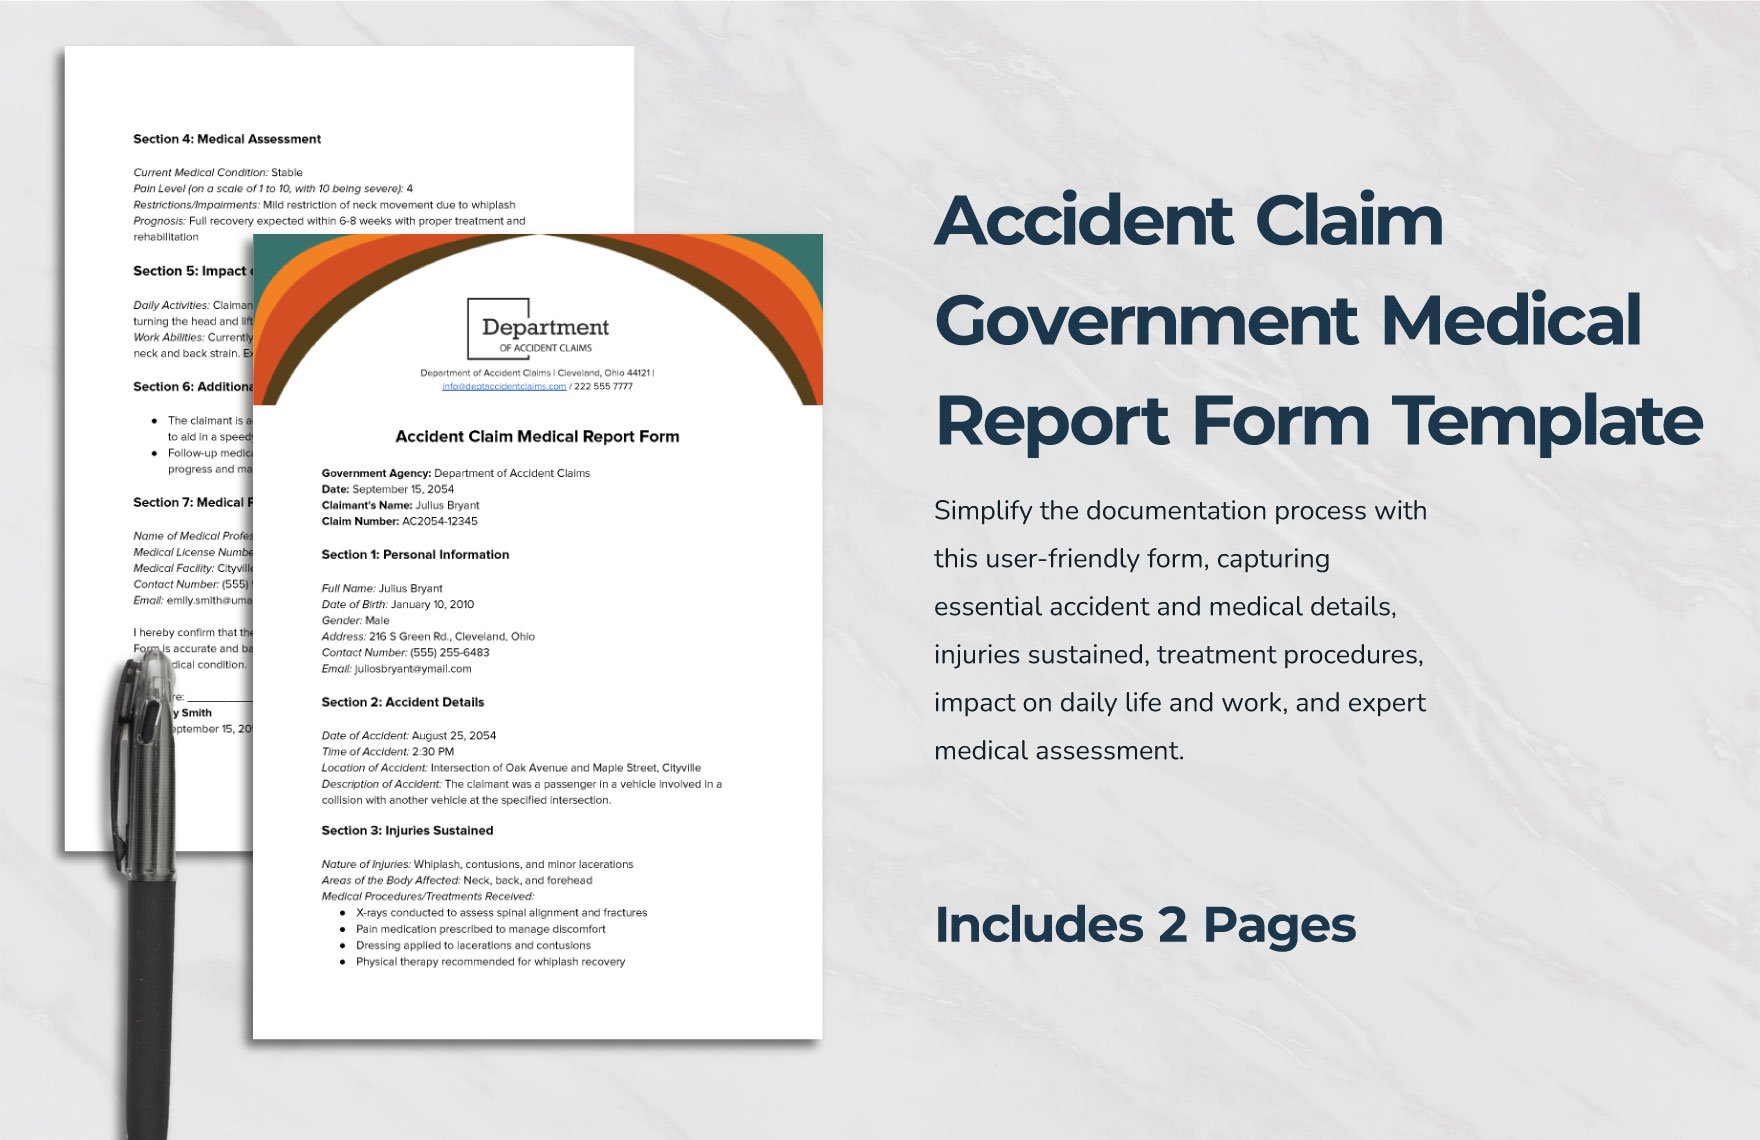 Accident Claim Government Medical Report Form Template